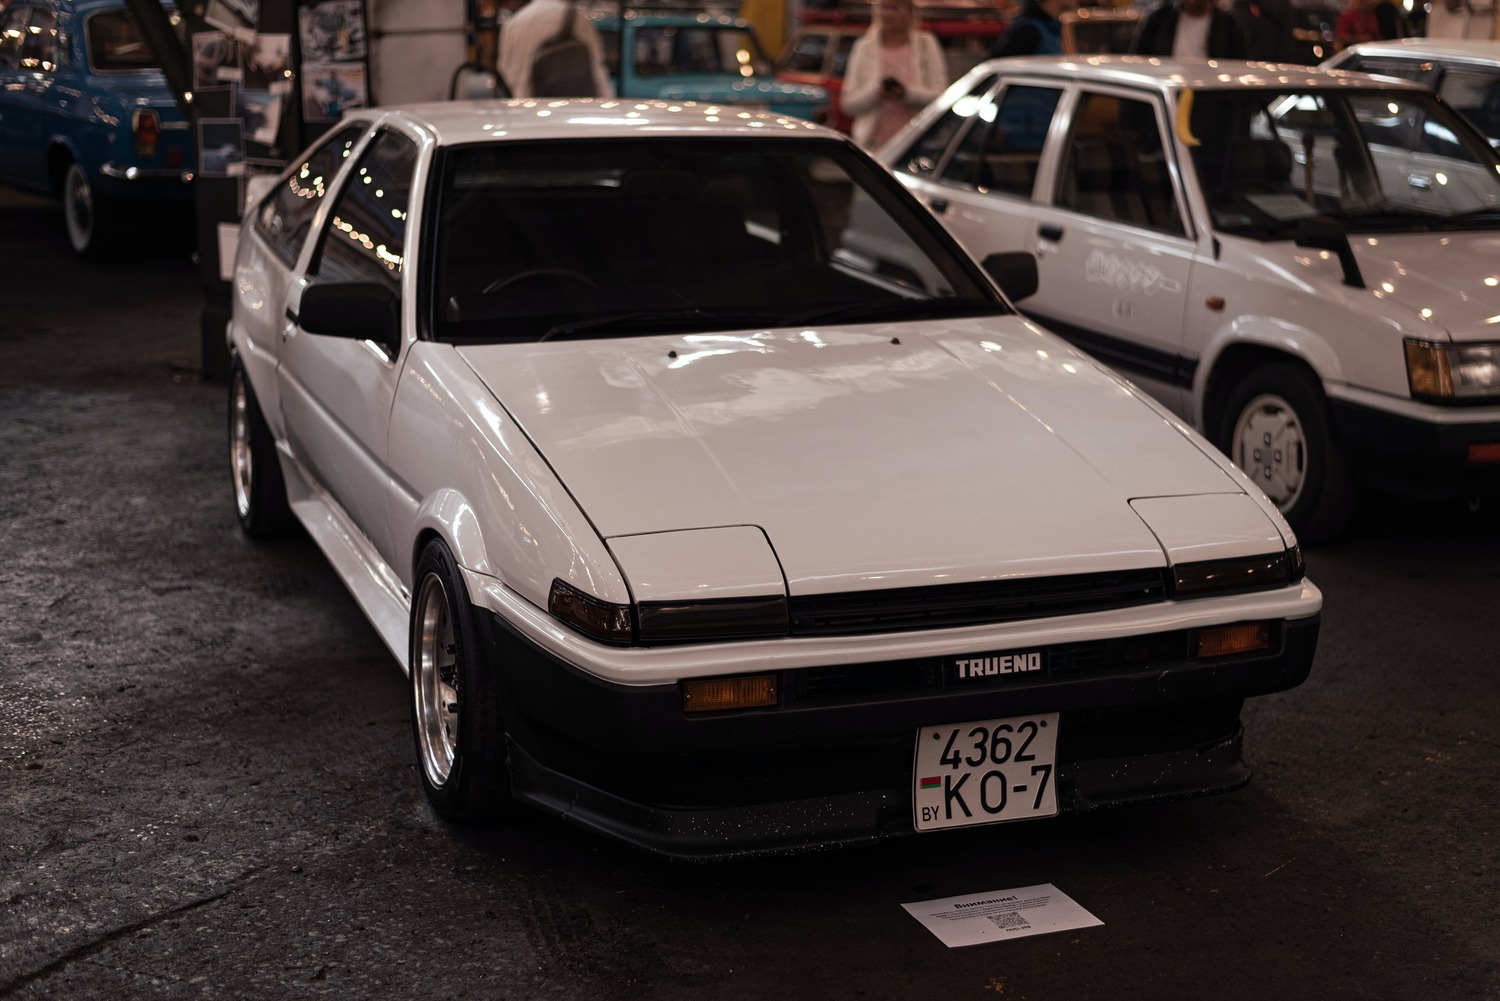 Why are the JDM Cars from the 80s not getting the attention they deserve?